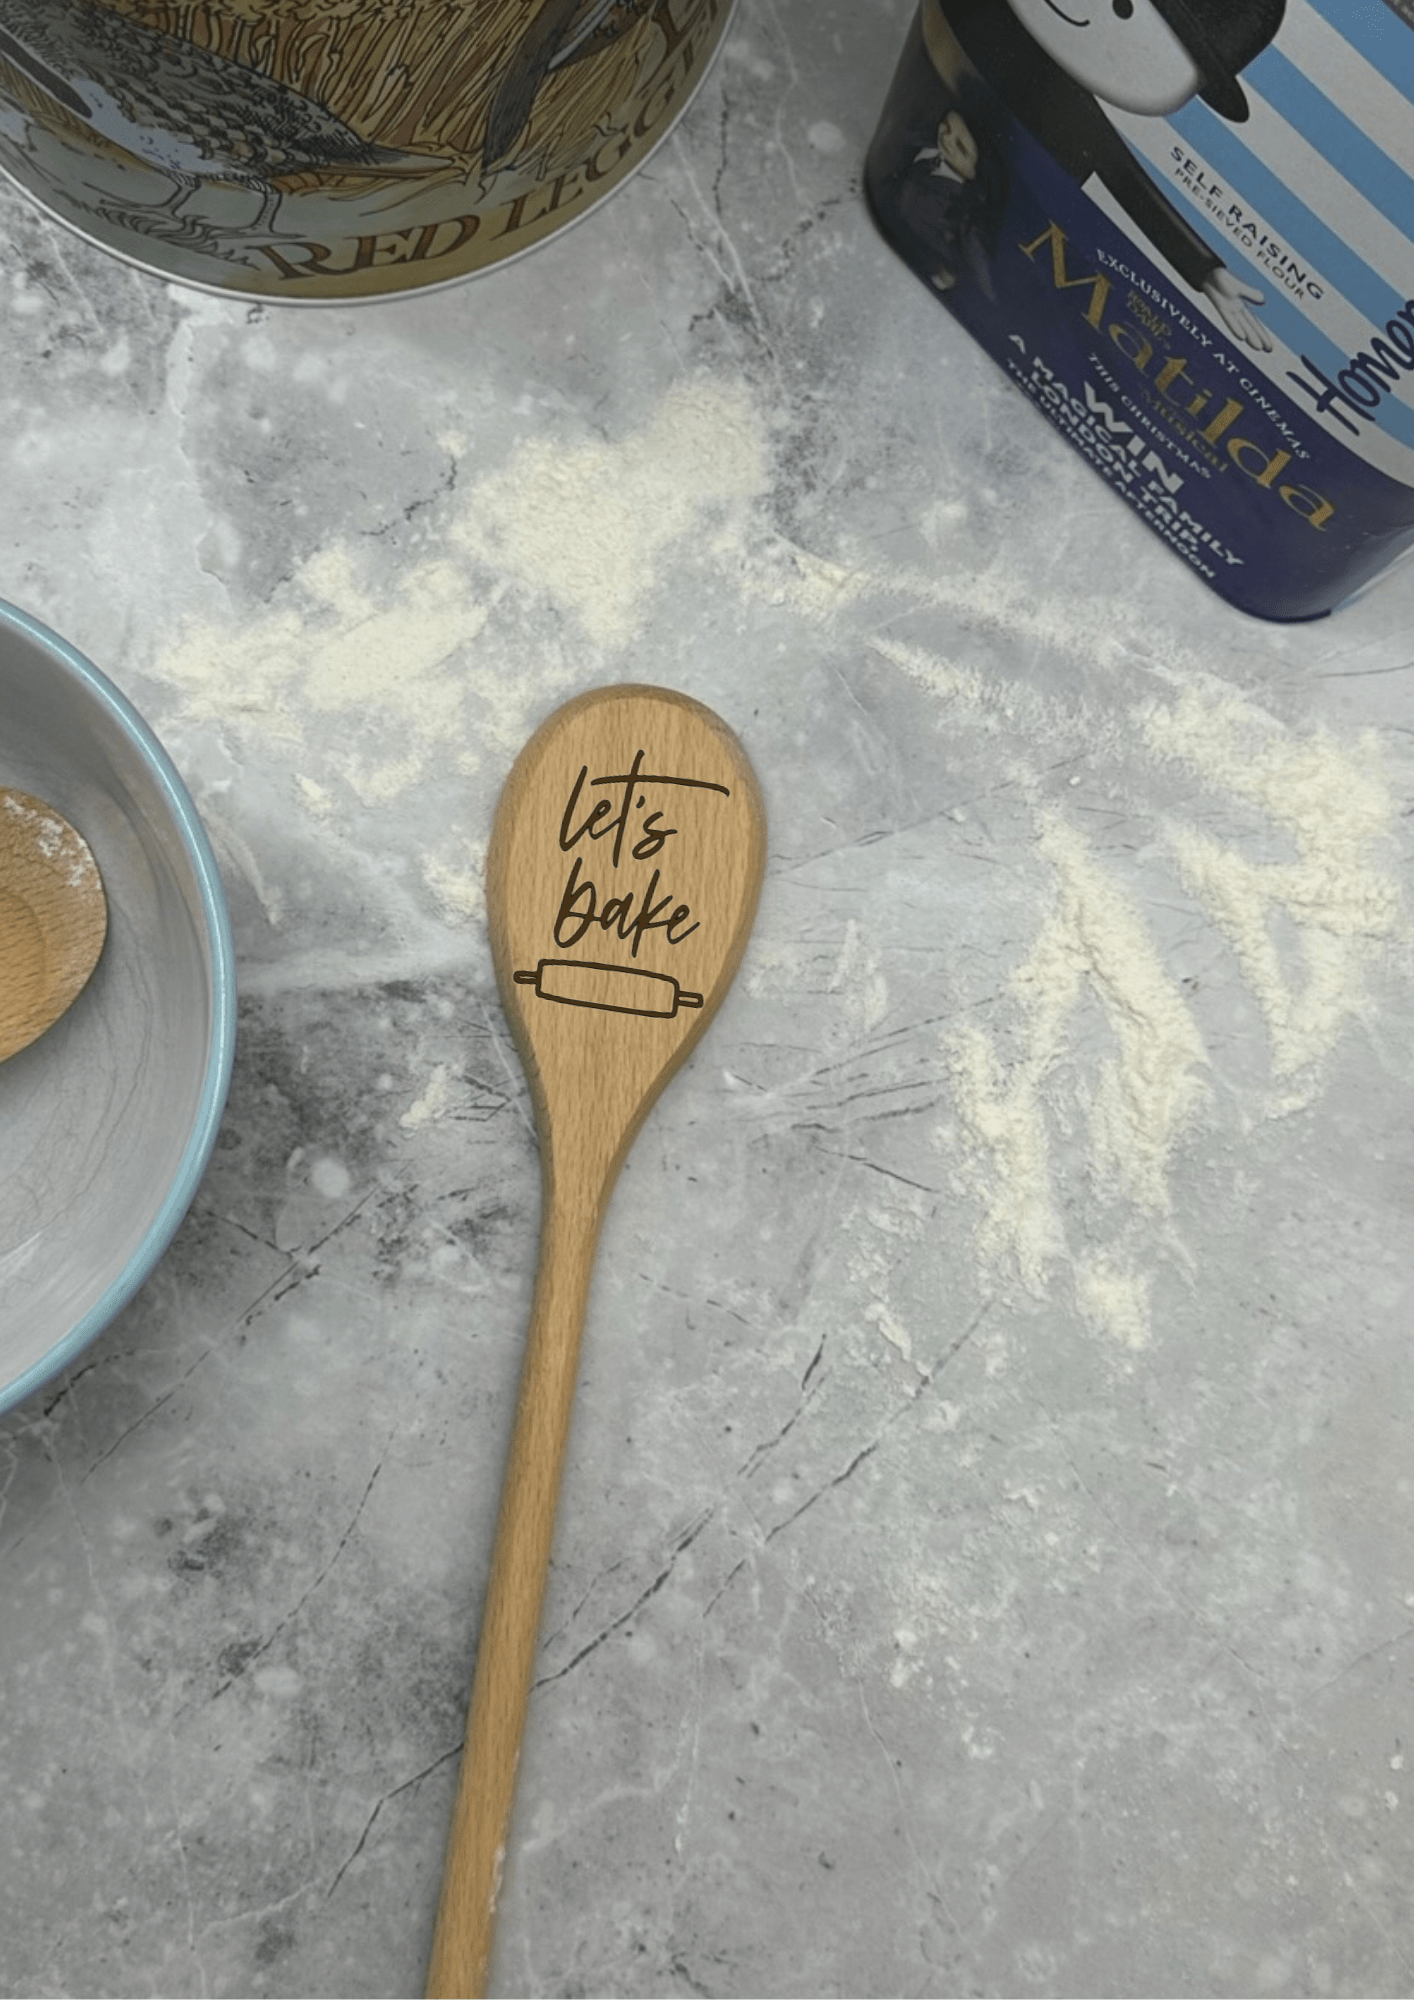 Wooden Spoon - Let's Bake!